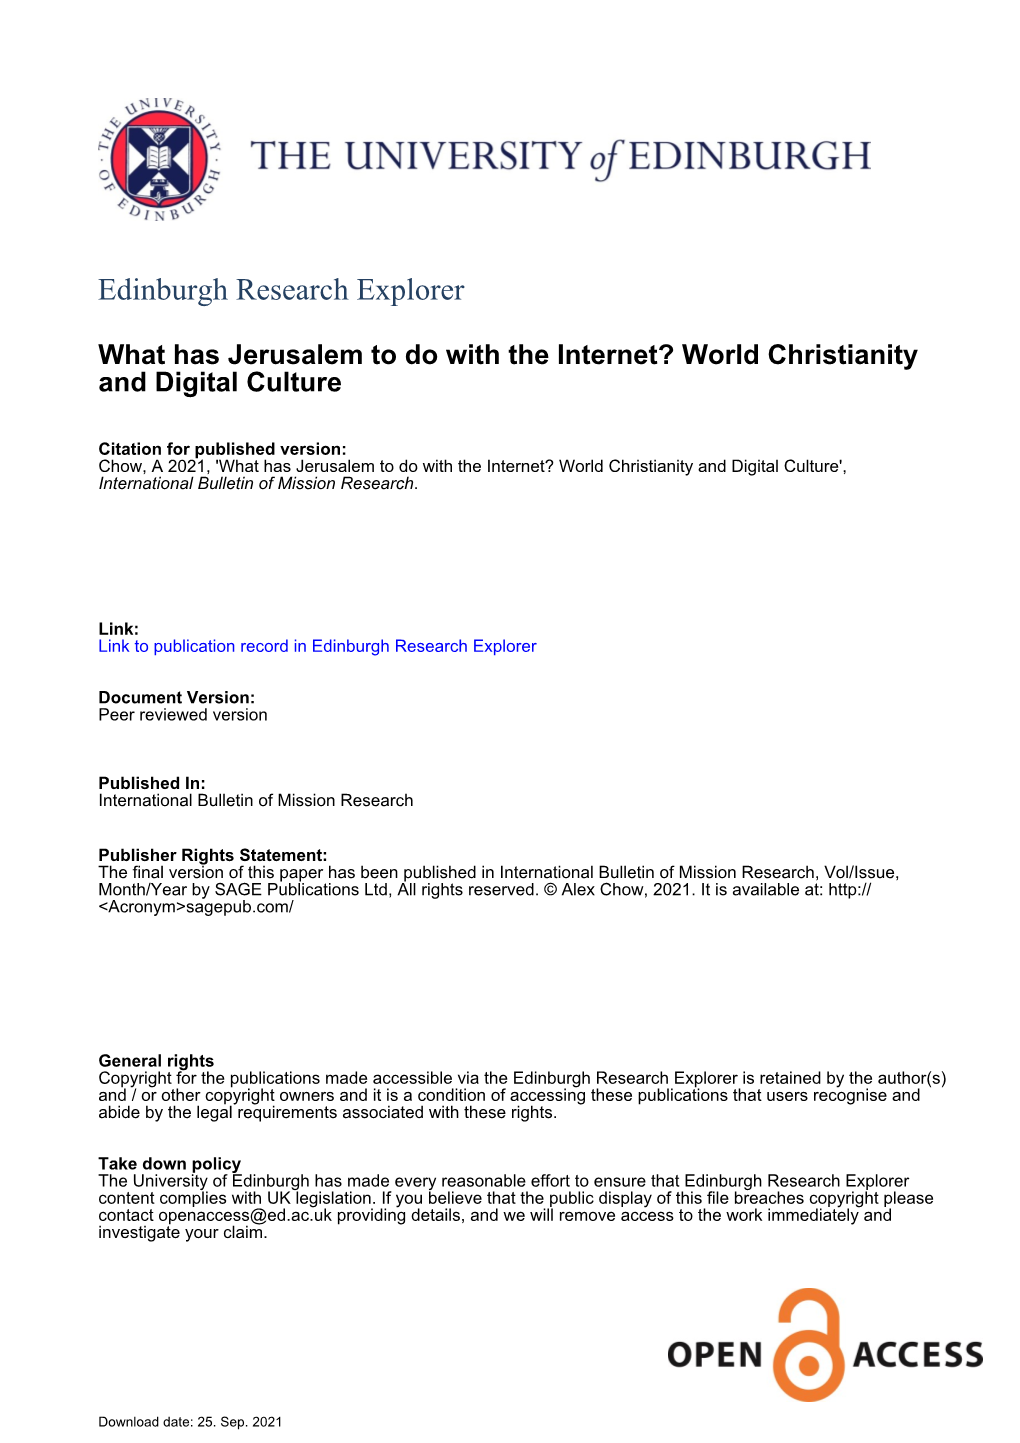 World Christianity and Digital Culture